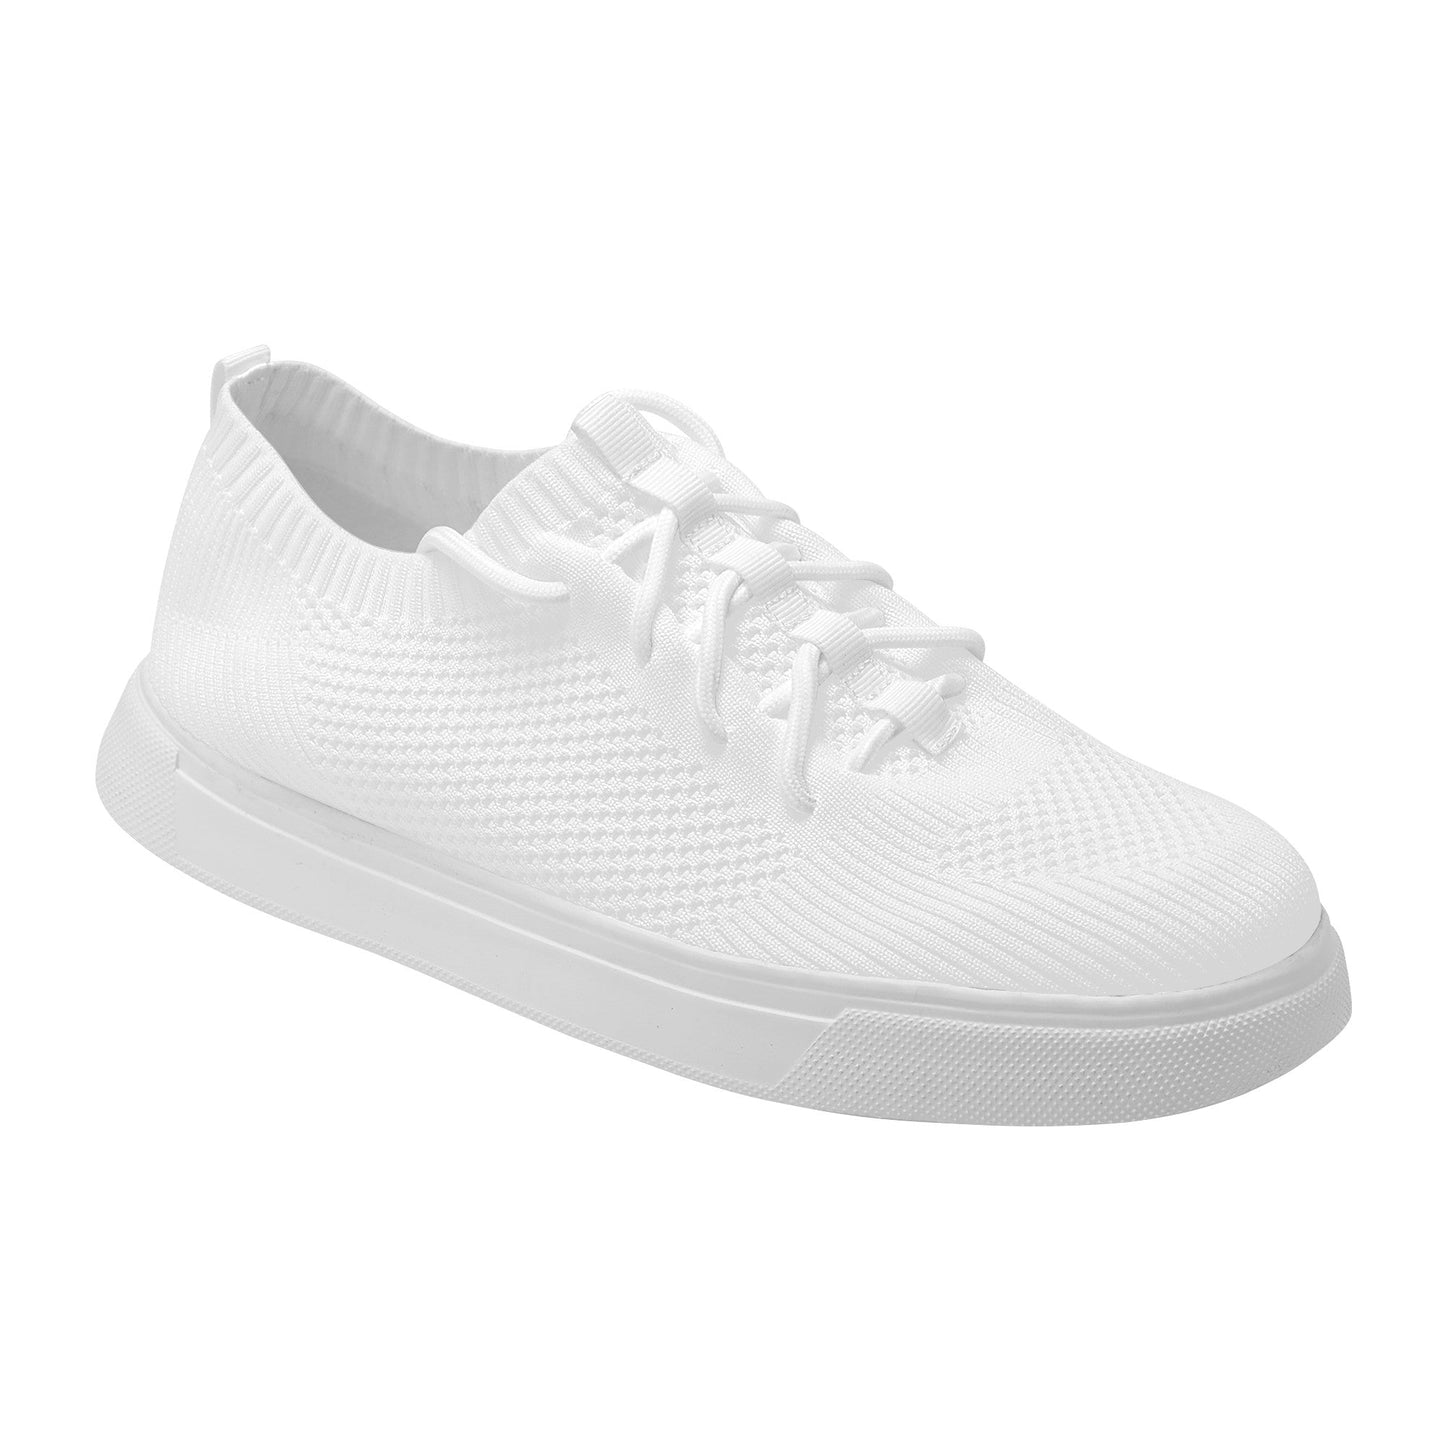 Custom Low Top Sneakers -Unisex Jump Serve Colloid Colors 